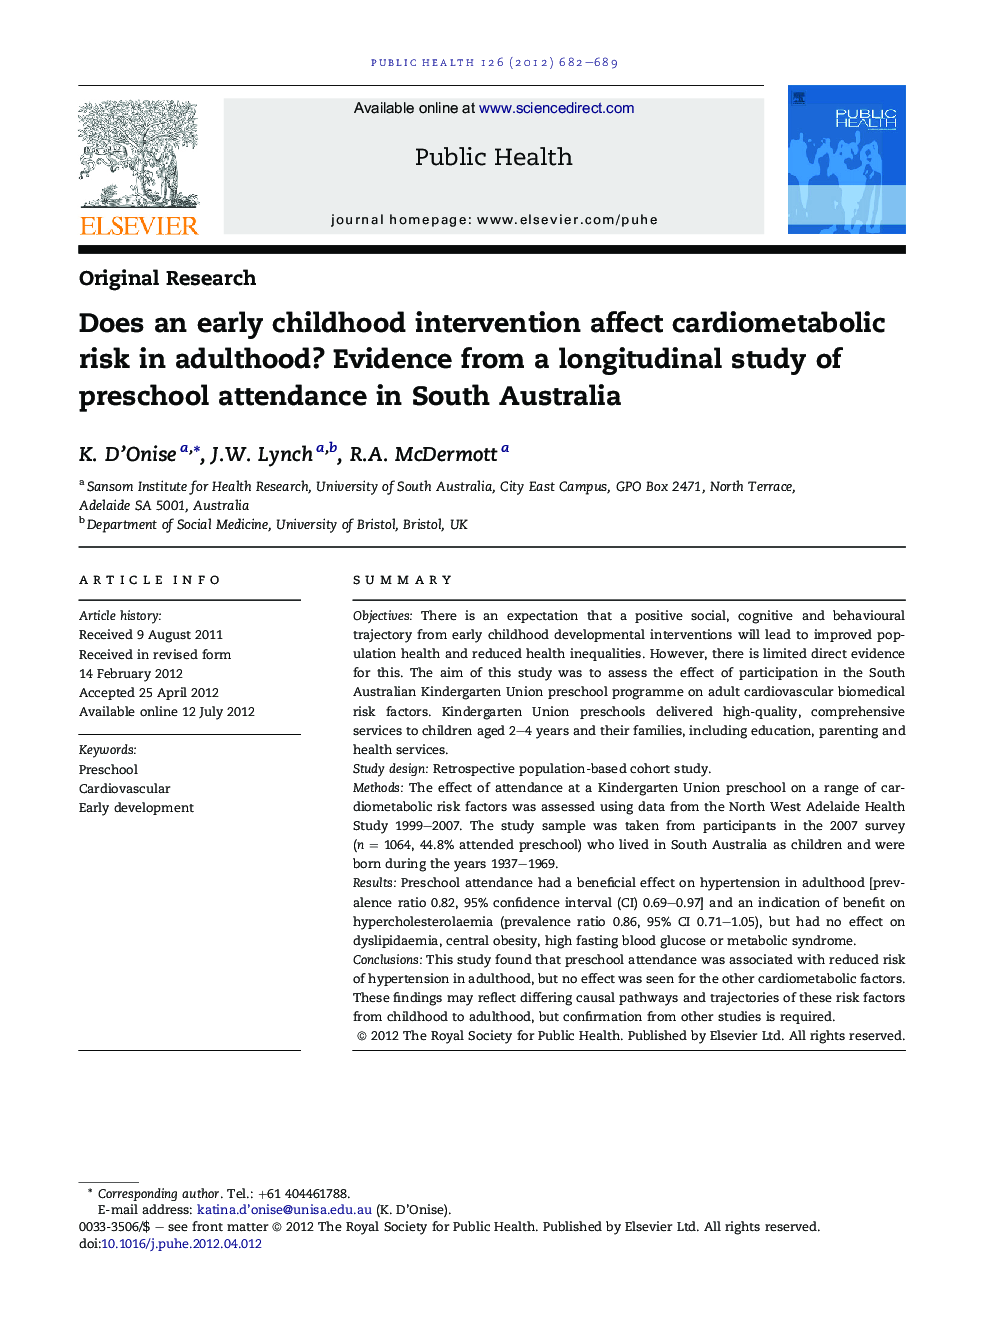 Does an early childhood intervention affect cardiometabolic risk in adulthood? Evidence from a longitudinal study of preschool attendance in South Australia